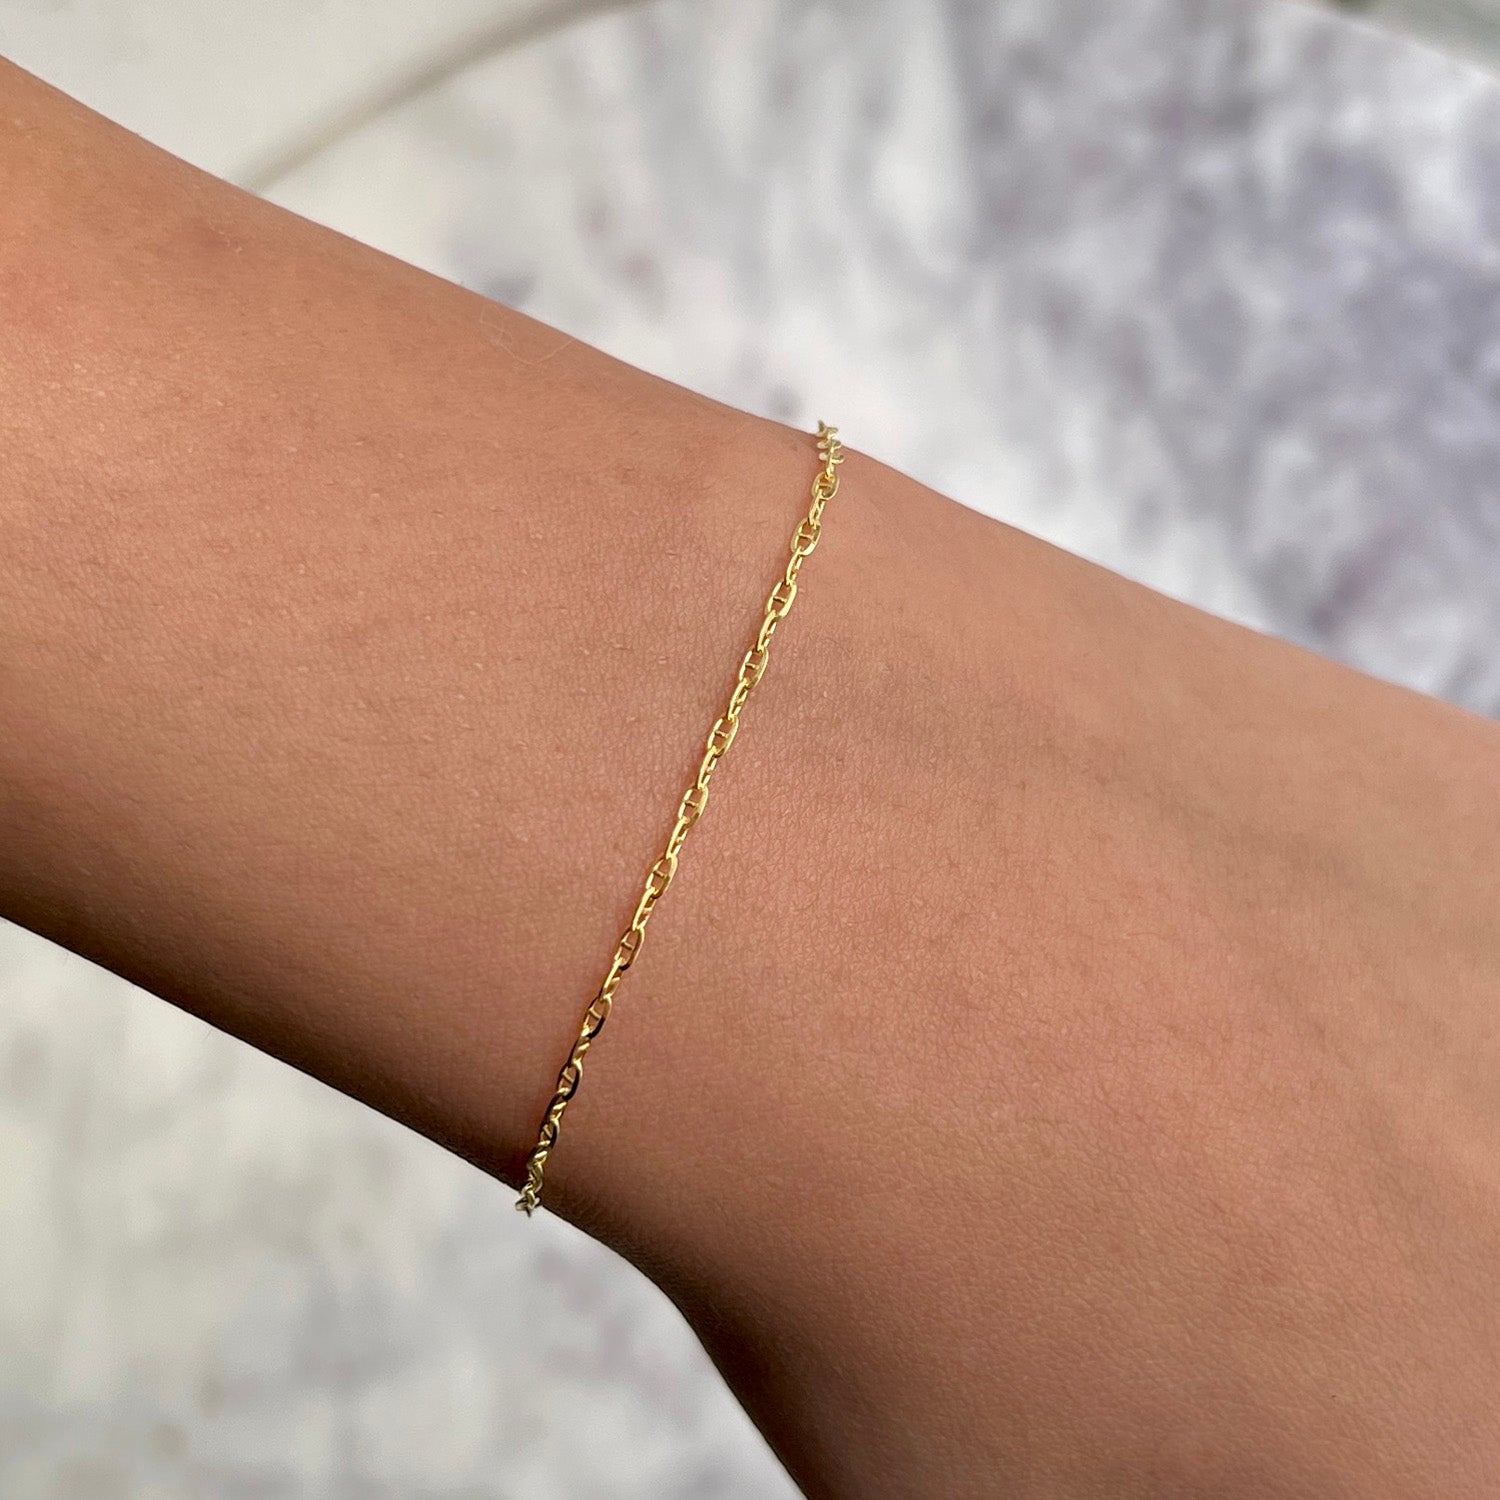 Mariner Anchor Chain Link Bracelet 14K Yellow Gold / 7.5 Inches by Baby Gold - Shop Custom Gold Jewelry